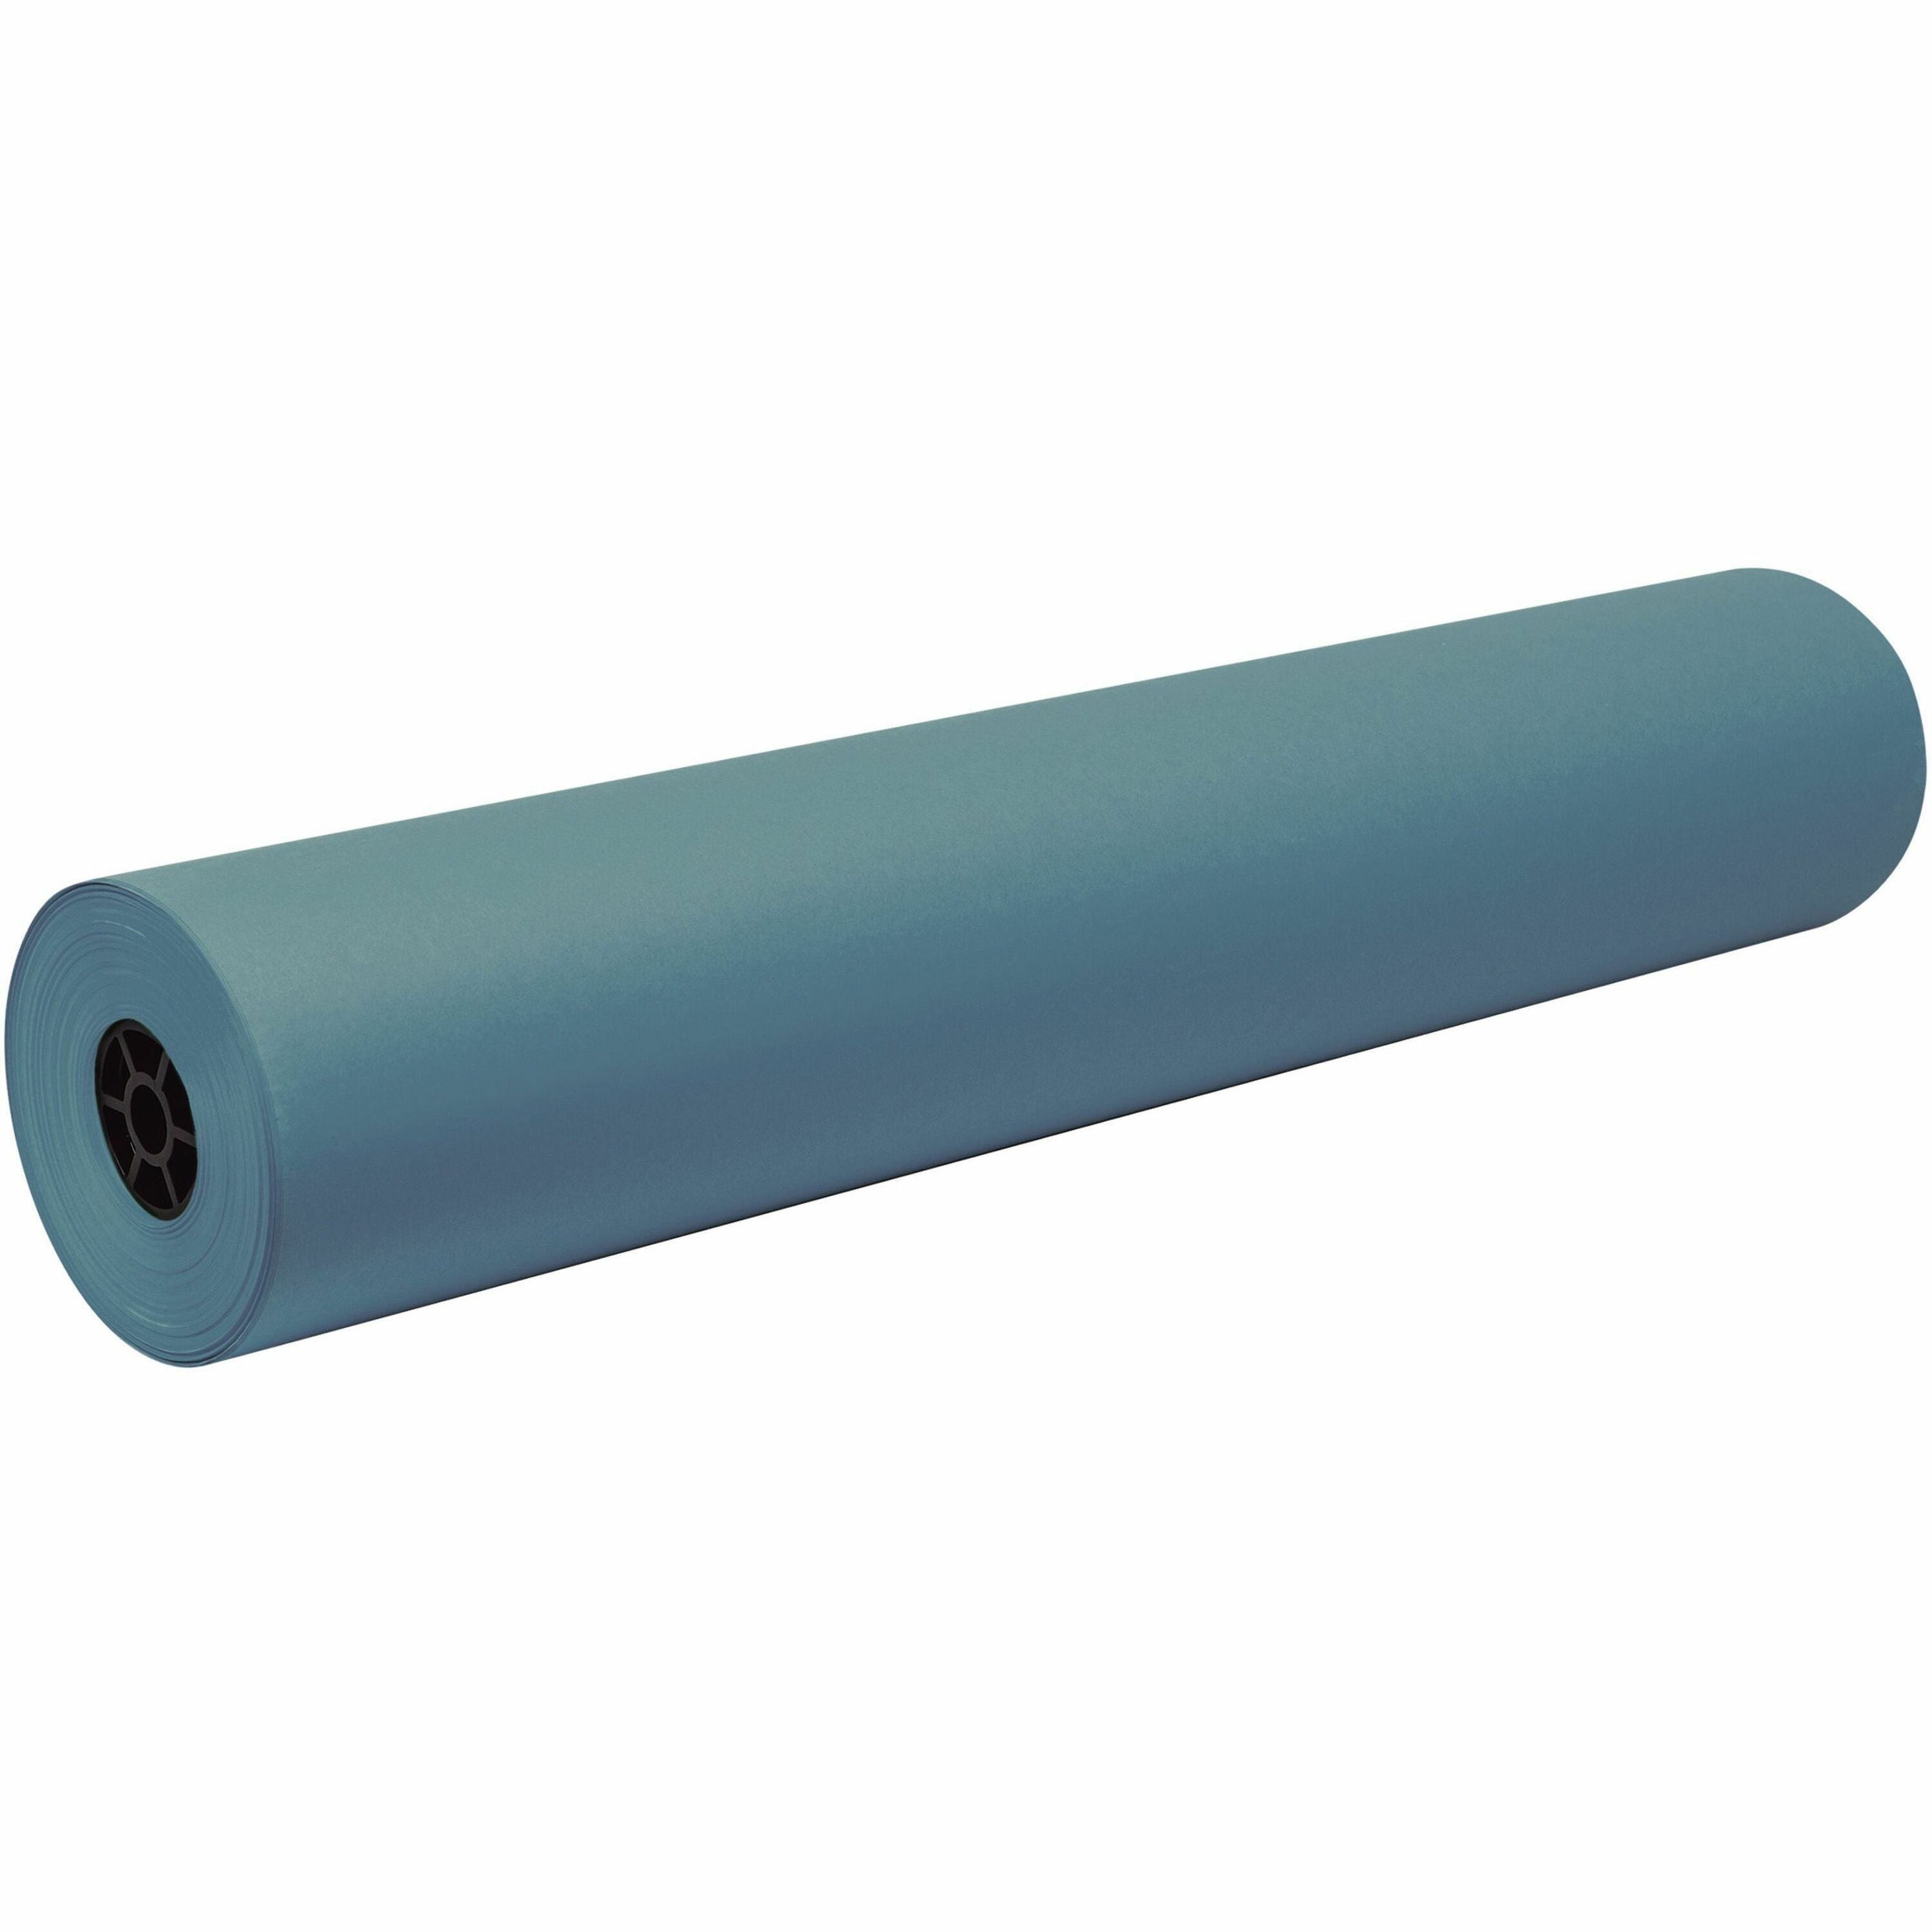 decorol-flame-retardant-art-paper-roll-art-project-mural-collage-bulletin-board-713height-x-36width-x-1000-ftlength-1-roll-sky-blue-sulphite_pac101205 - 1